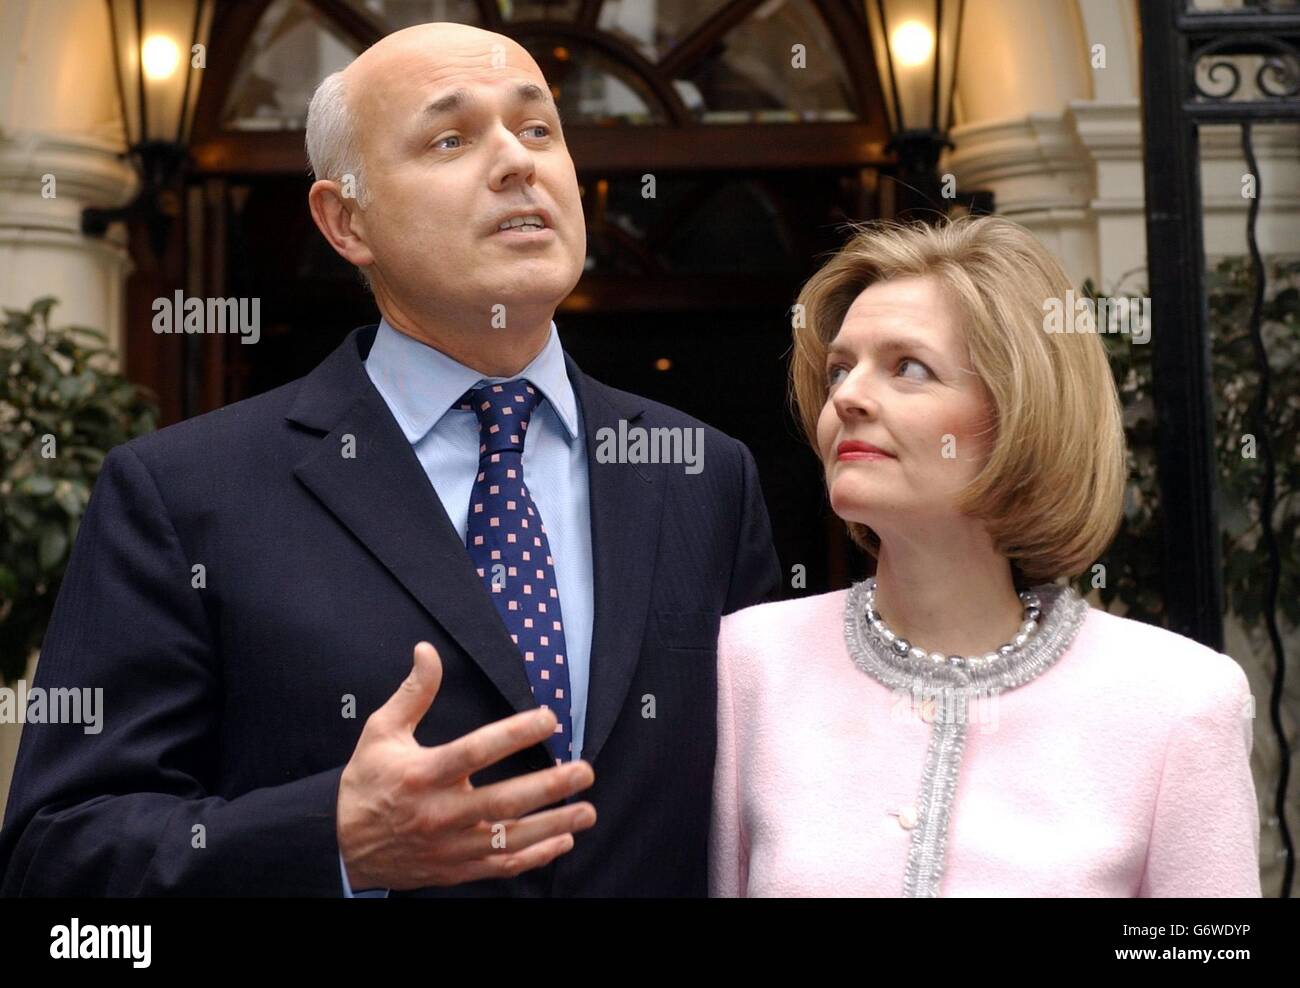 Conservative MP and former leader of the opposition Iain Duncan Smith speaks to the media with his wife Betsy in central London. Mr Duncan Smith has been cleared of wrongdoing over the 'Betsygate' row after the Committee on Standards and Privileges dismissed complaints that he improperly employed his wife as a secretary. Stock Photo